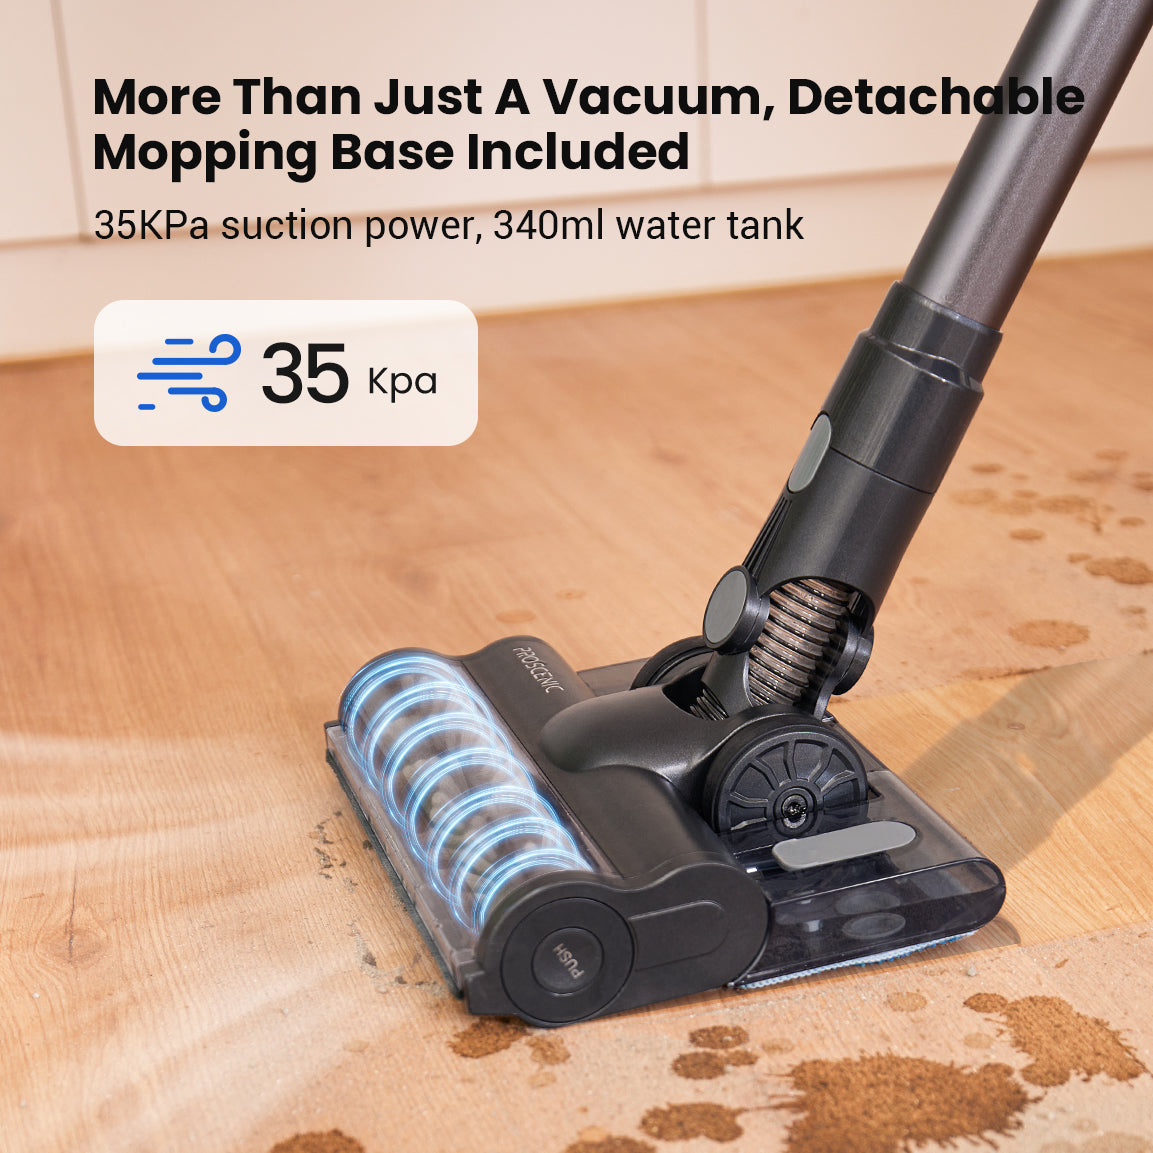 proscenic P11 mopping cordless vacuum cleaner